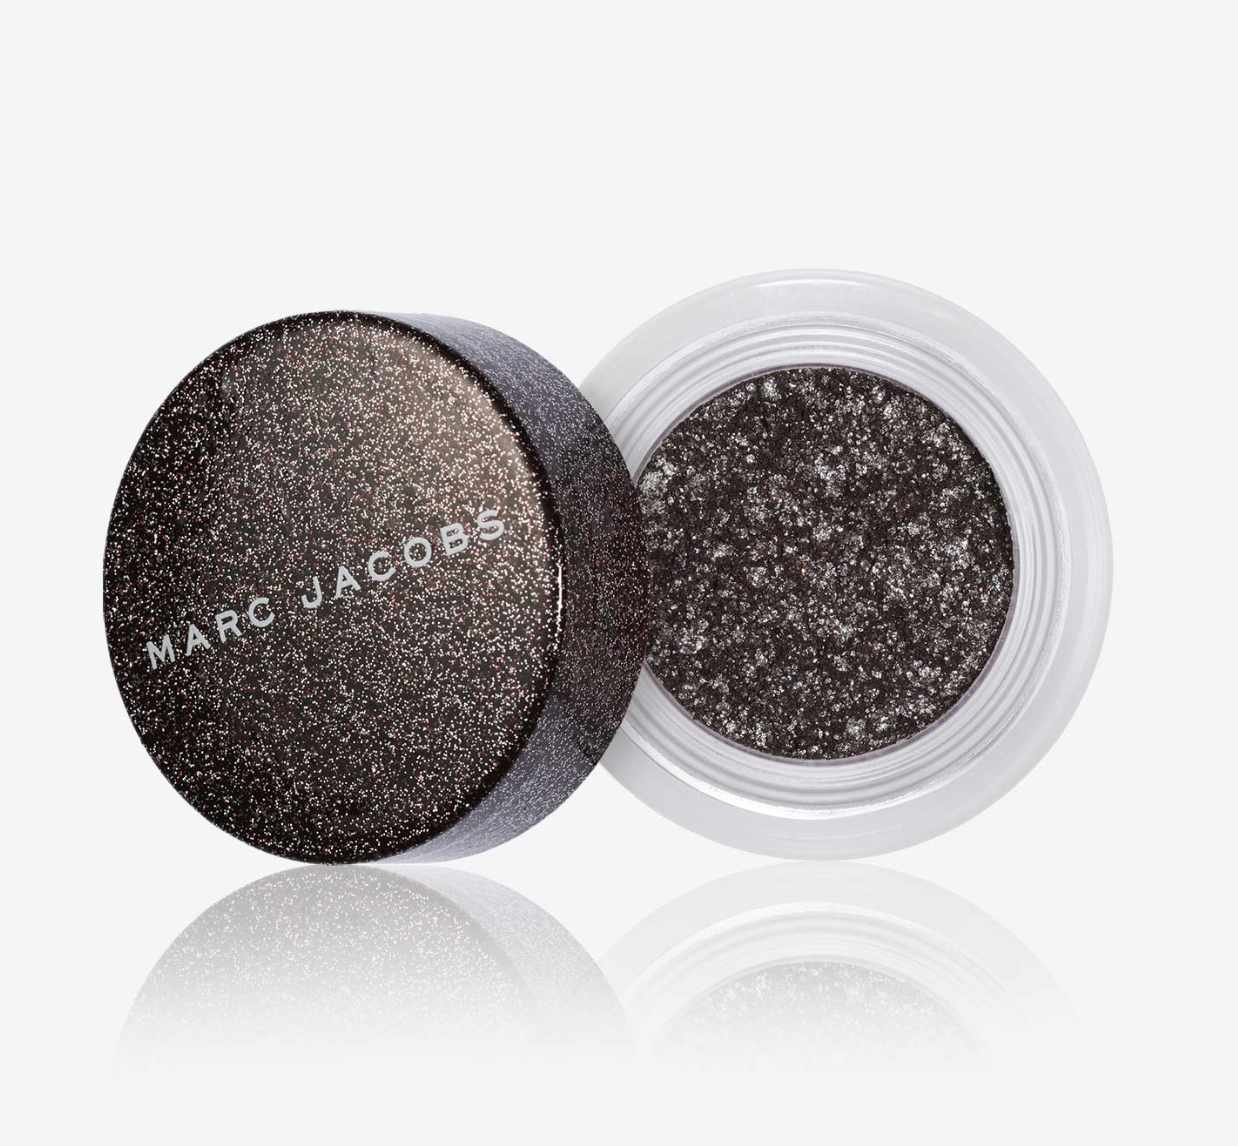 8 New Glitter Eye Shadows To Try Just In Time For New Year's Eve